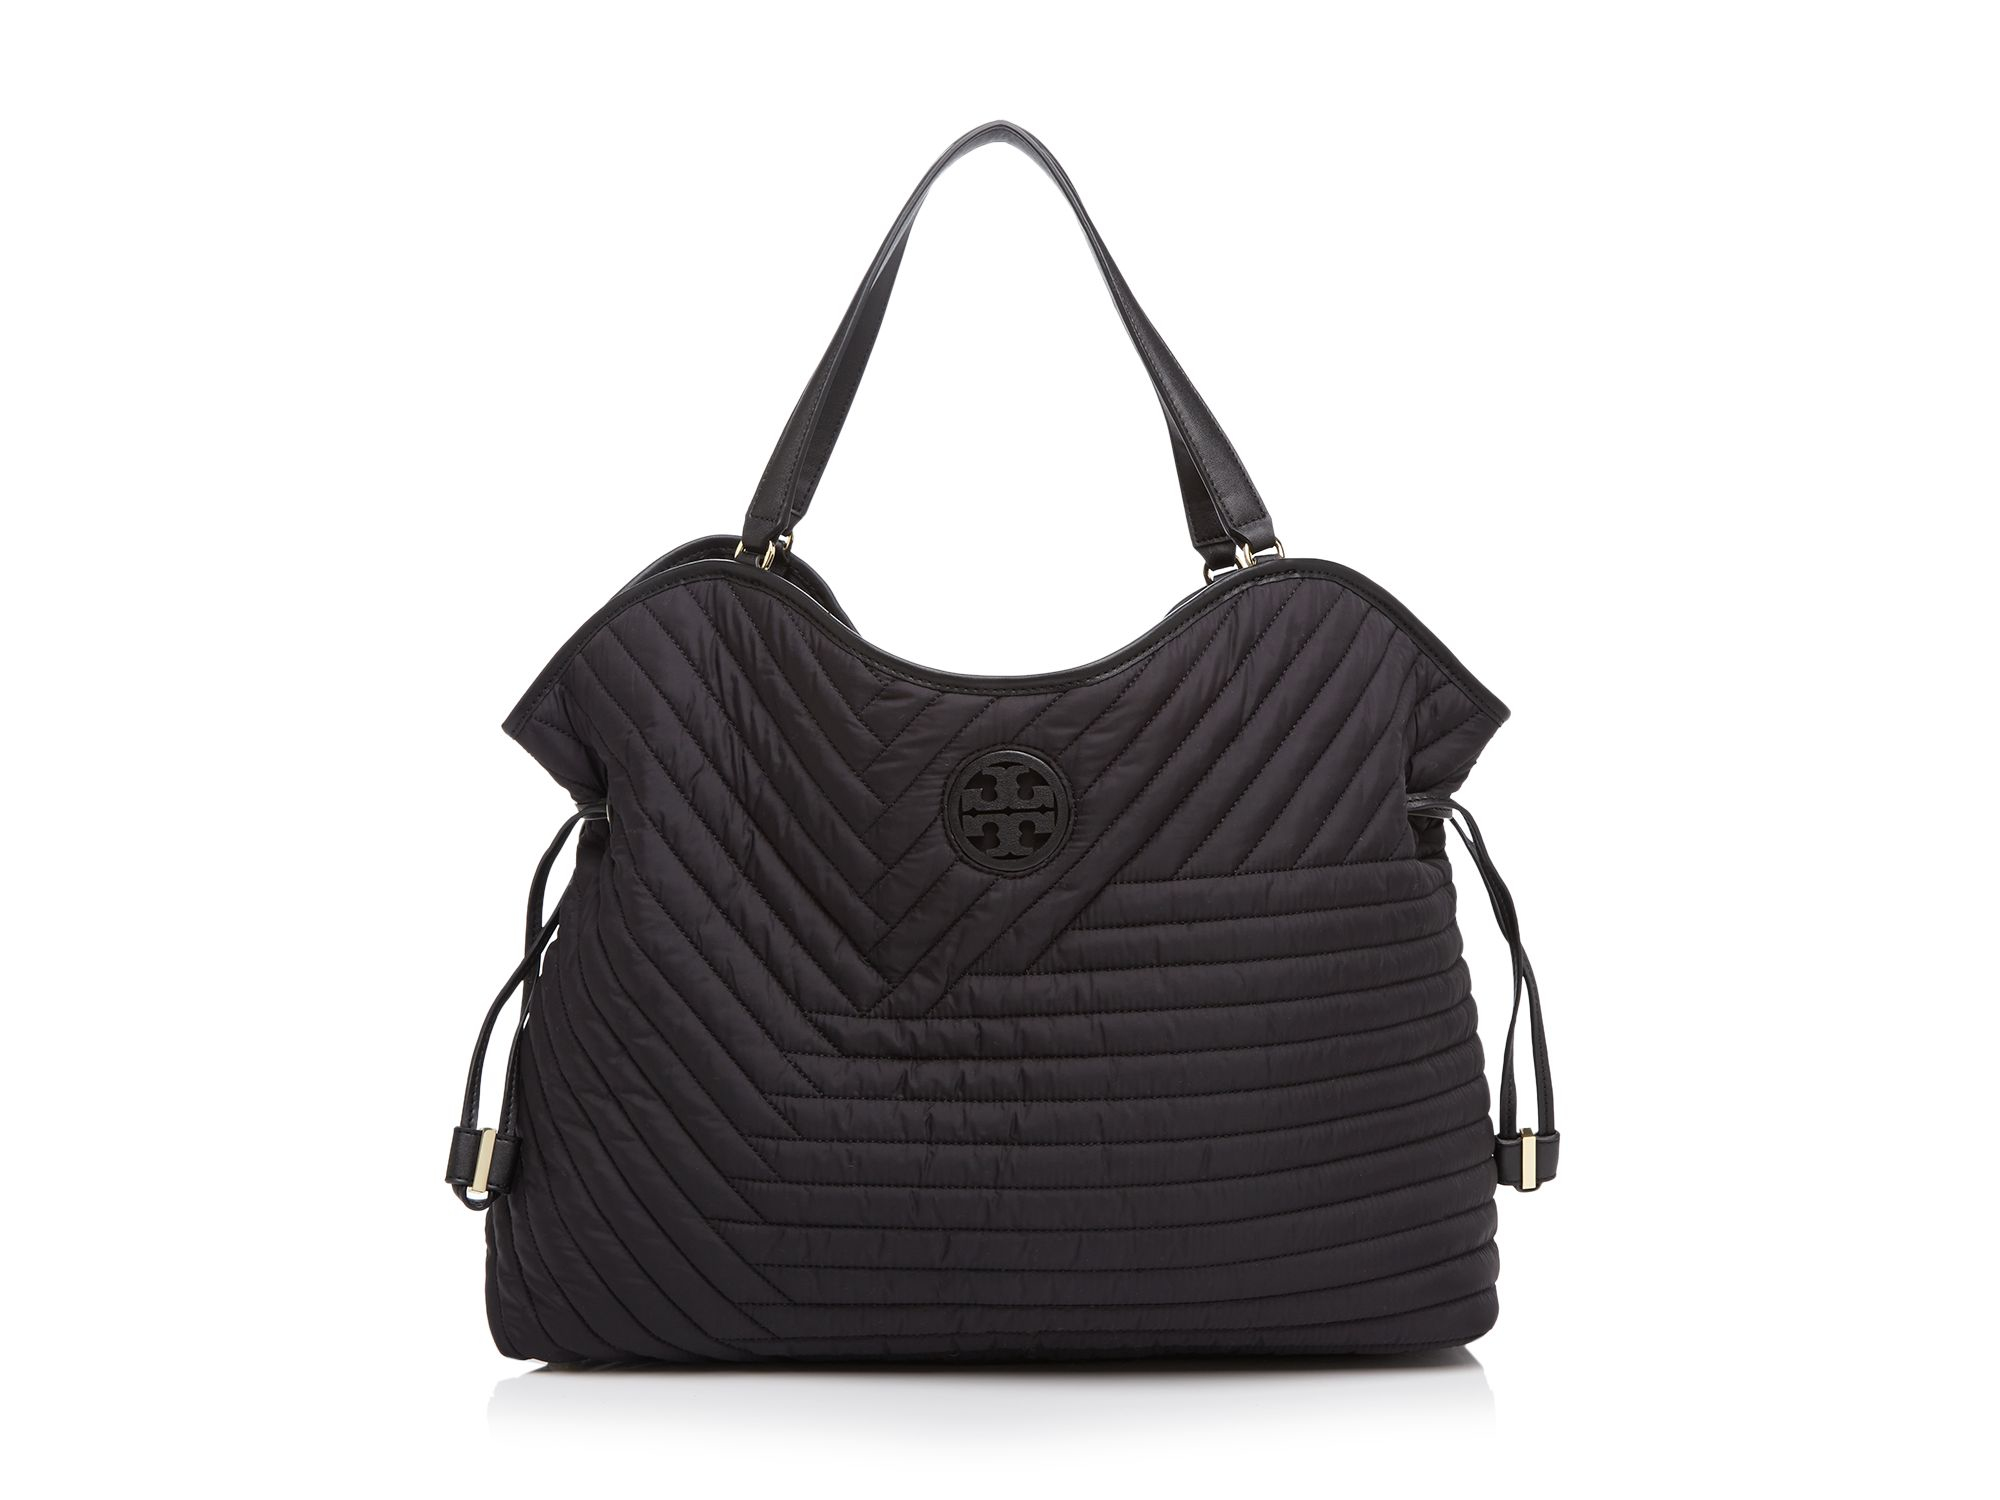 Tory Burch Synthetic Quilted Nylon Tote in Black - Lyst